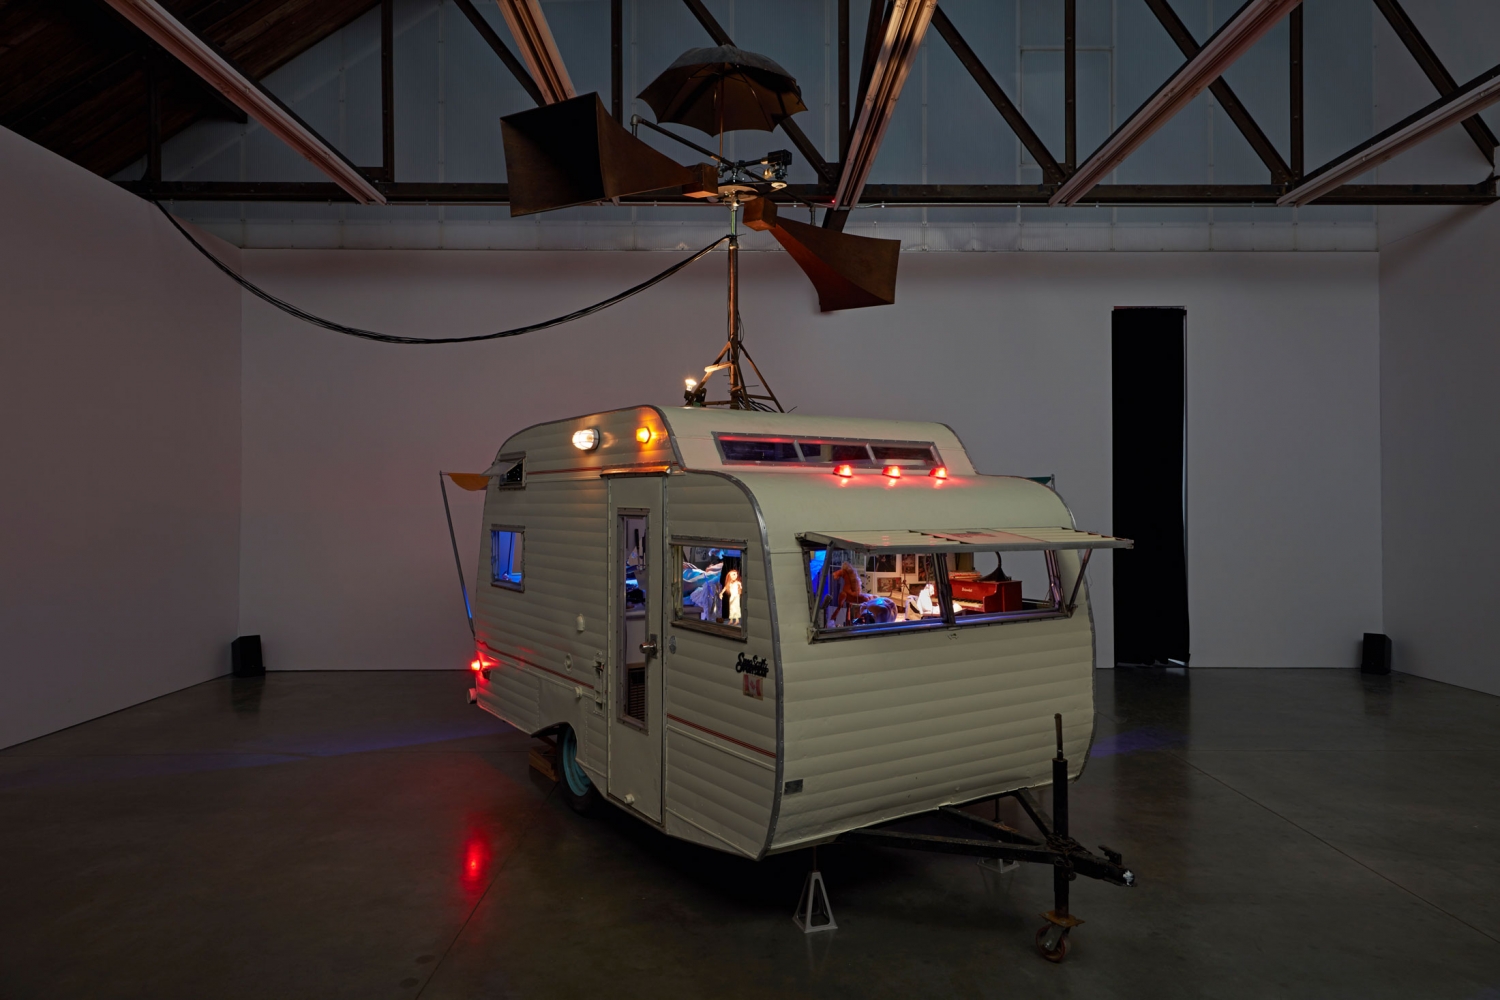 Janet Cardiff and&amp;nbsp;George Bures Miller
The Marionette Maker,&amp;nbsp;2014
Mixed media installation including caravan, marionettes, robotics, audio, and lighting
​Duration: Approximately 14 minutes, looped
184 x&amp;nbsp;222 x&amp;nbsp;130 inches
(467.4 x 563.9 x 330.2 cm)
Installation view at Luhring Augustine, New York, 2015